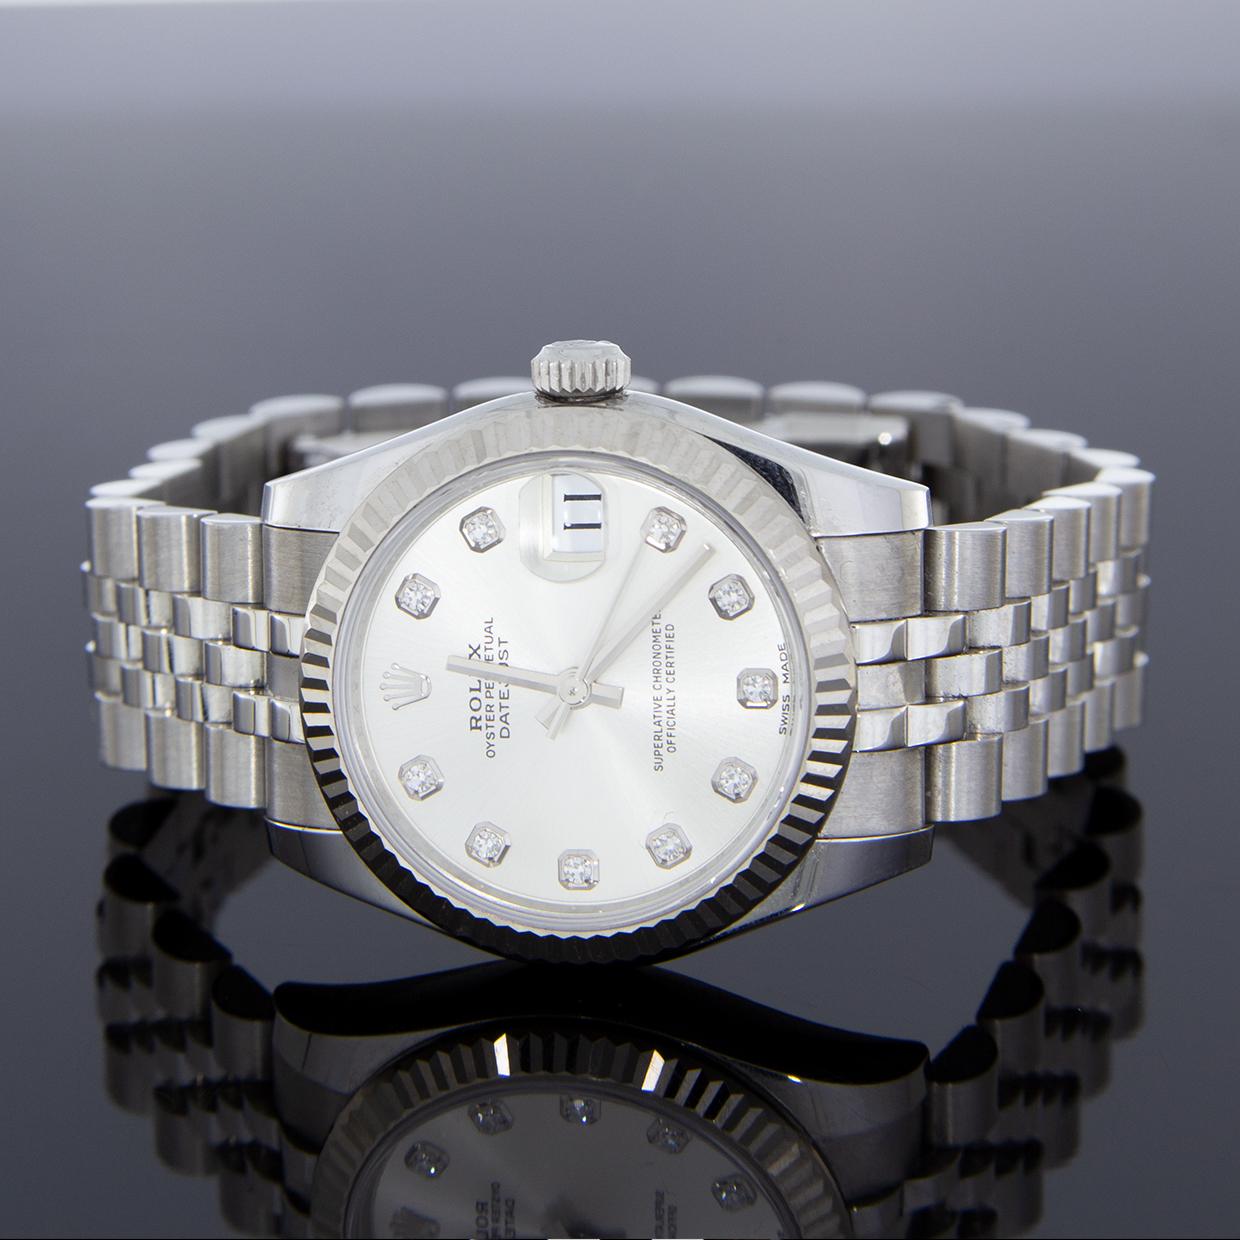 Item Details
Estimated Retail $9,400.00
Brand Rolex
Case Material Stainless Steel
MPN 178274
Face Color Silver
Case Size 31 mm
Cert/Paperwork Box & Papers

Pioneers of the wristwatch since 1905, Rolex is at the origin of landmark innovations in